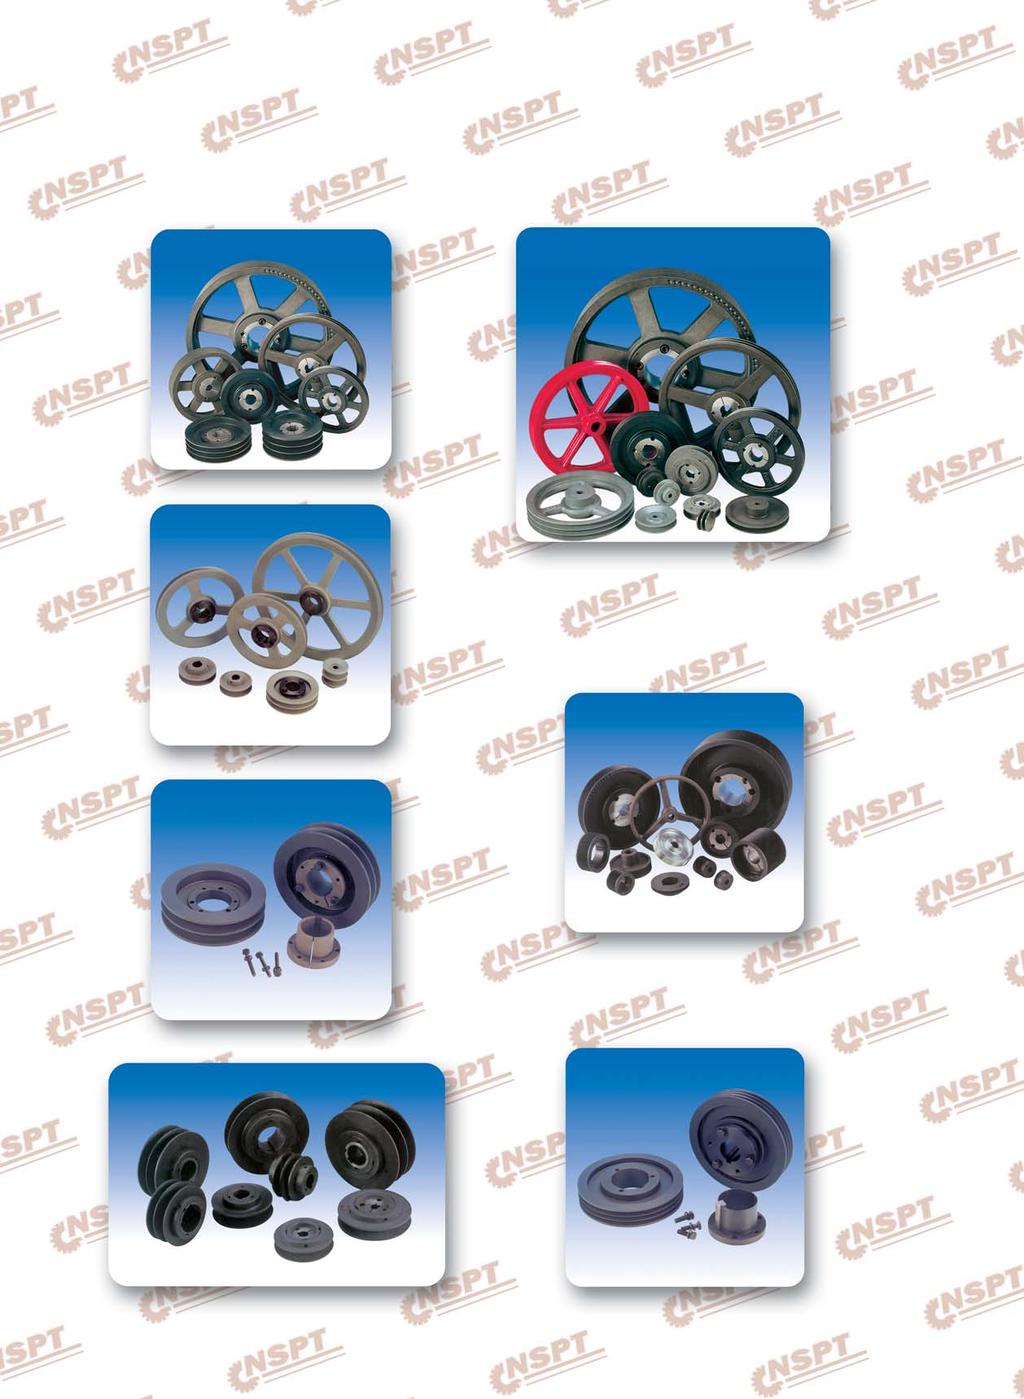 V-belt Pulleys with Taper Bore All Kinds of Standard Timing-belt Pulleys V-belt Pulleys AK, BK, AKH, BKH Series of